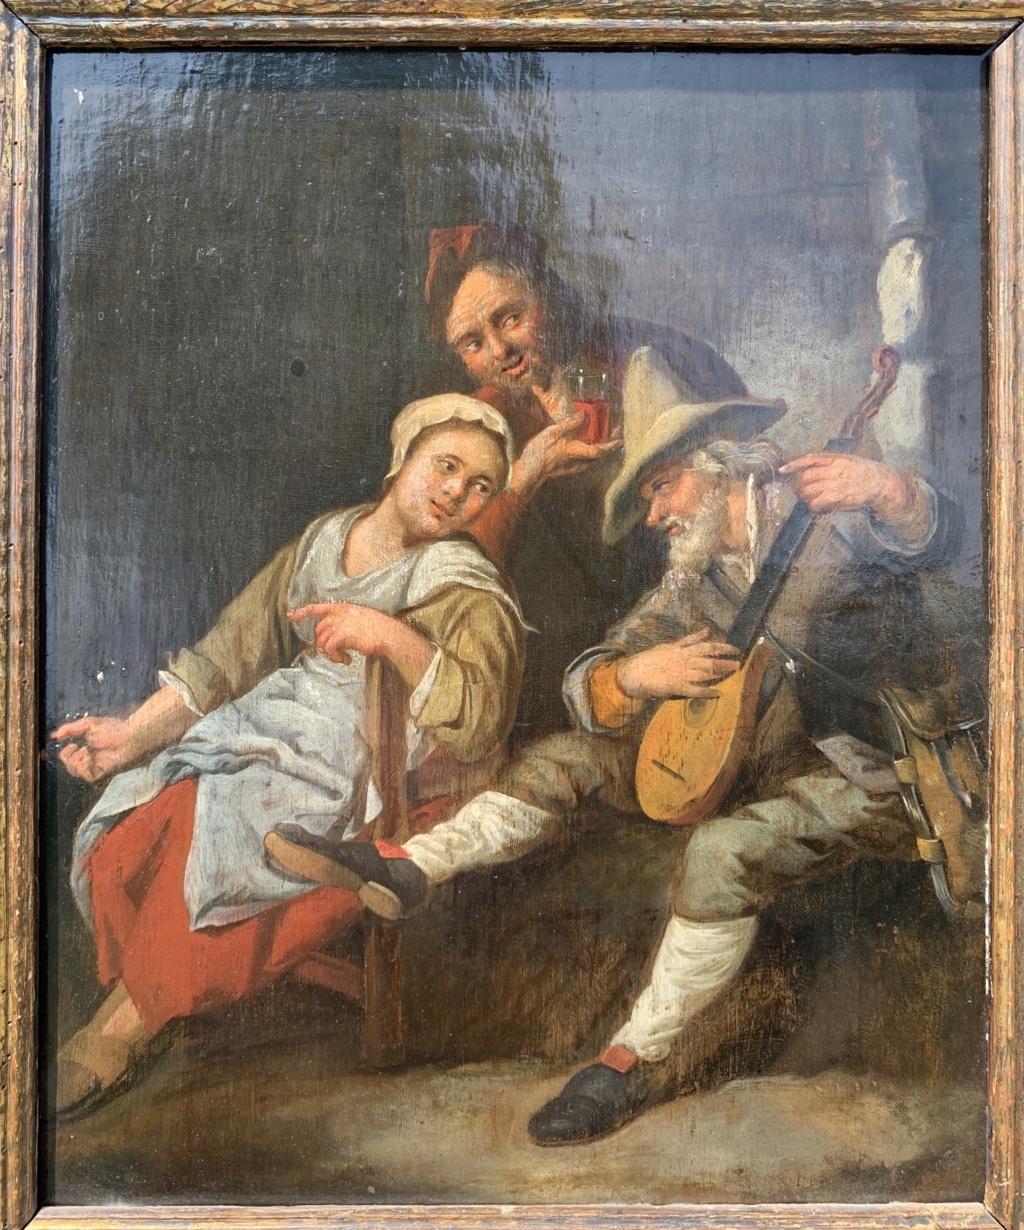 Antique Dutch painter - 18th century figure painting - Interior Tavern mandolin  - Baroque Painting by Unknown